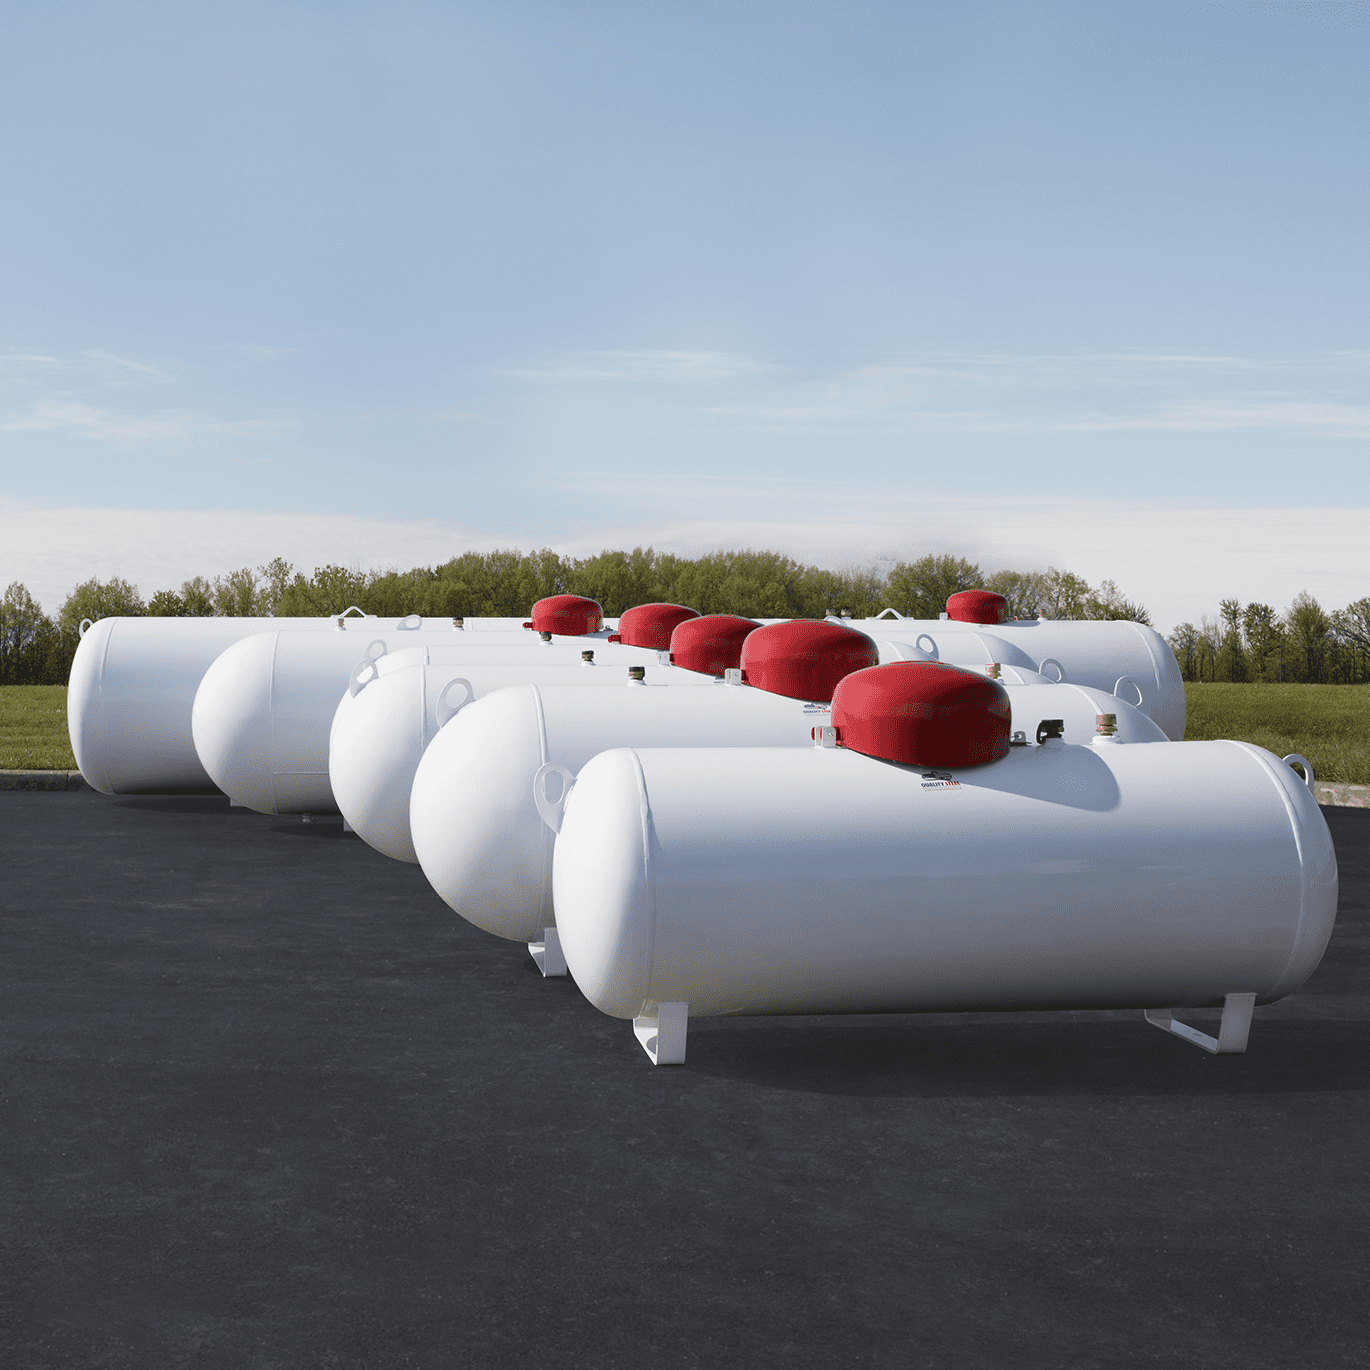 New Steel Propane Tanks and Vessels